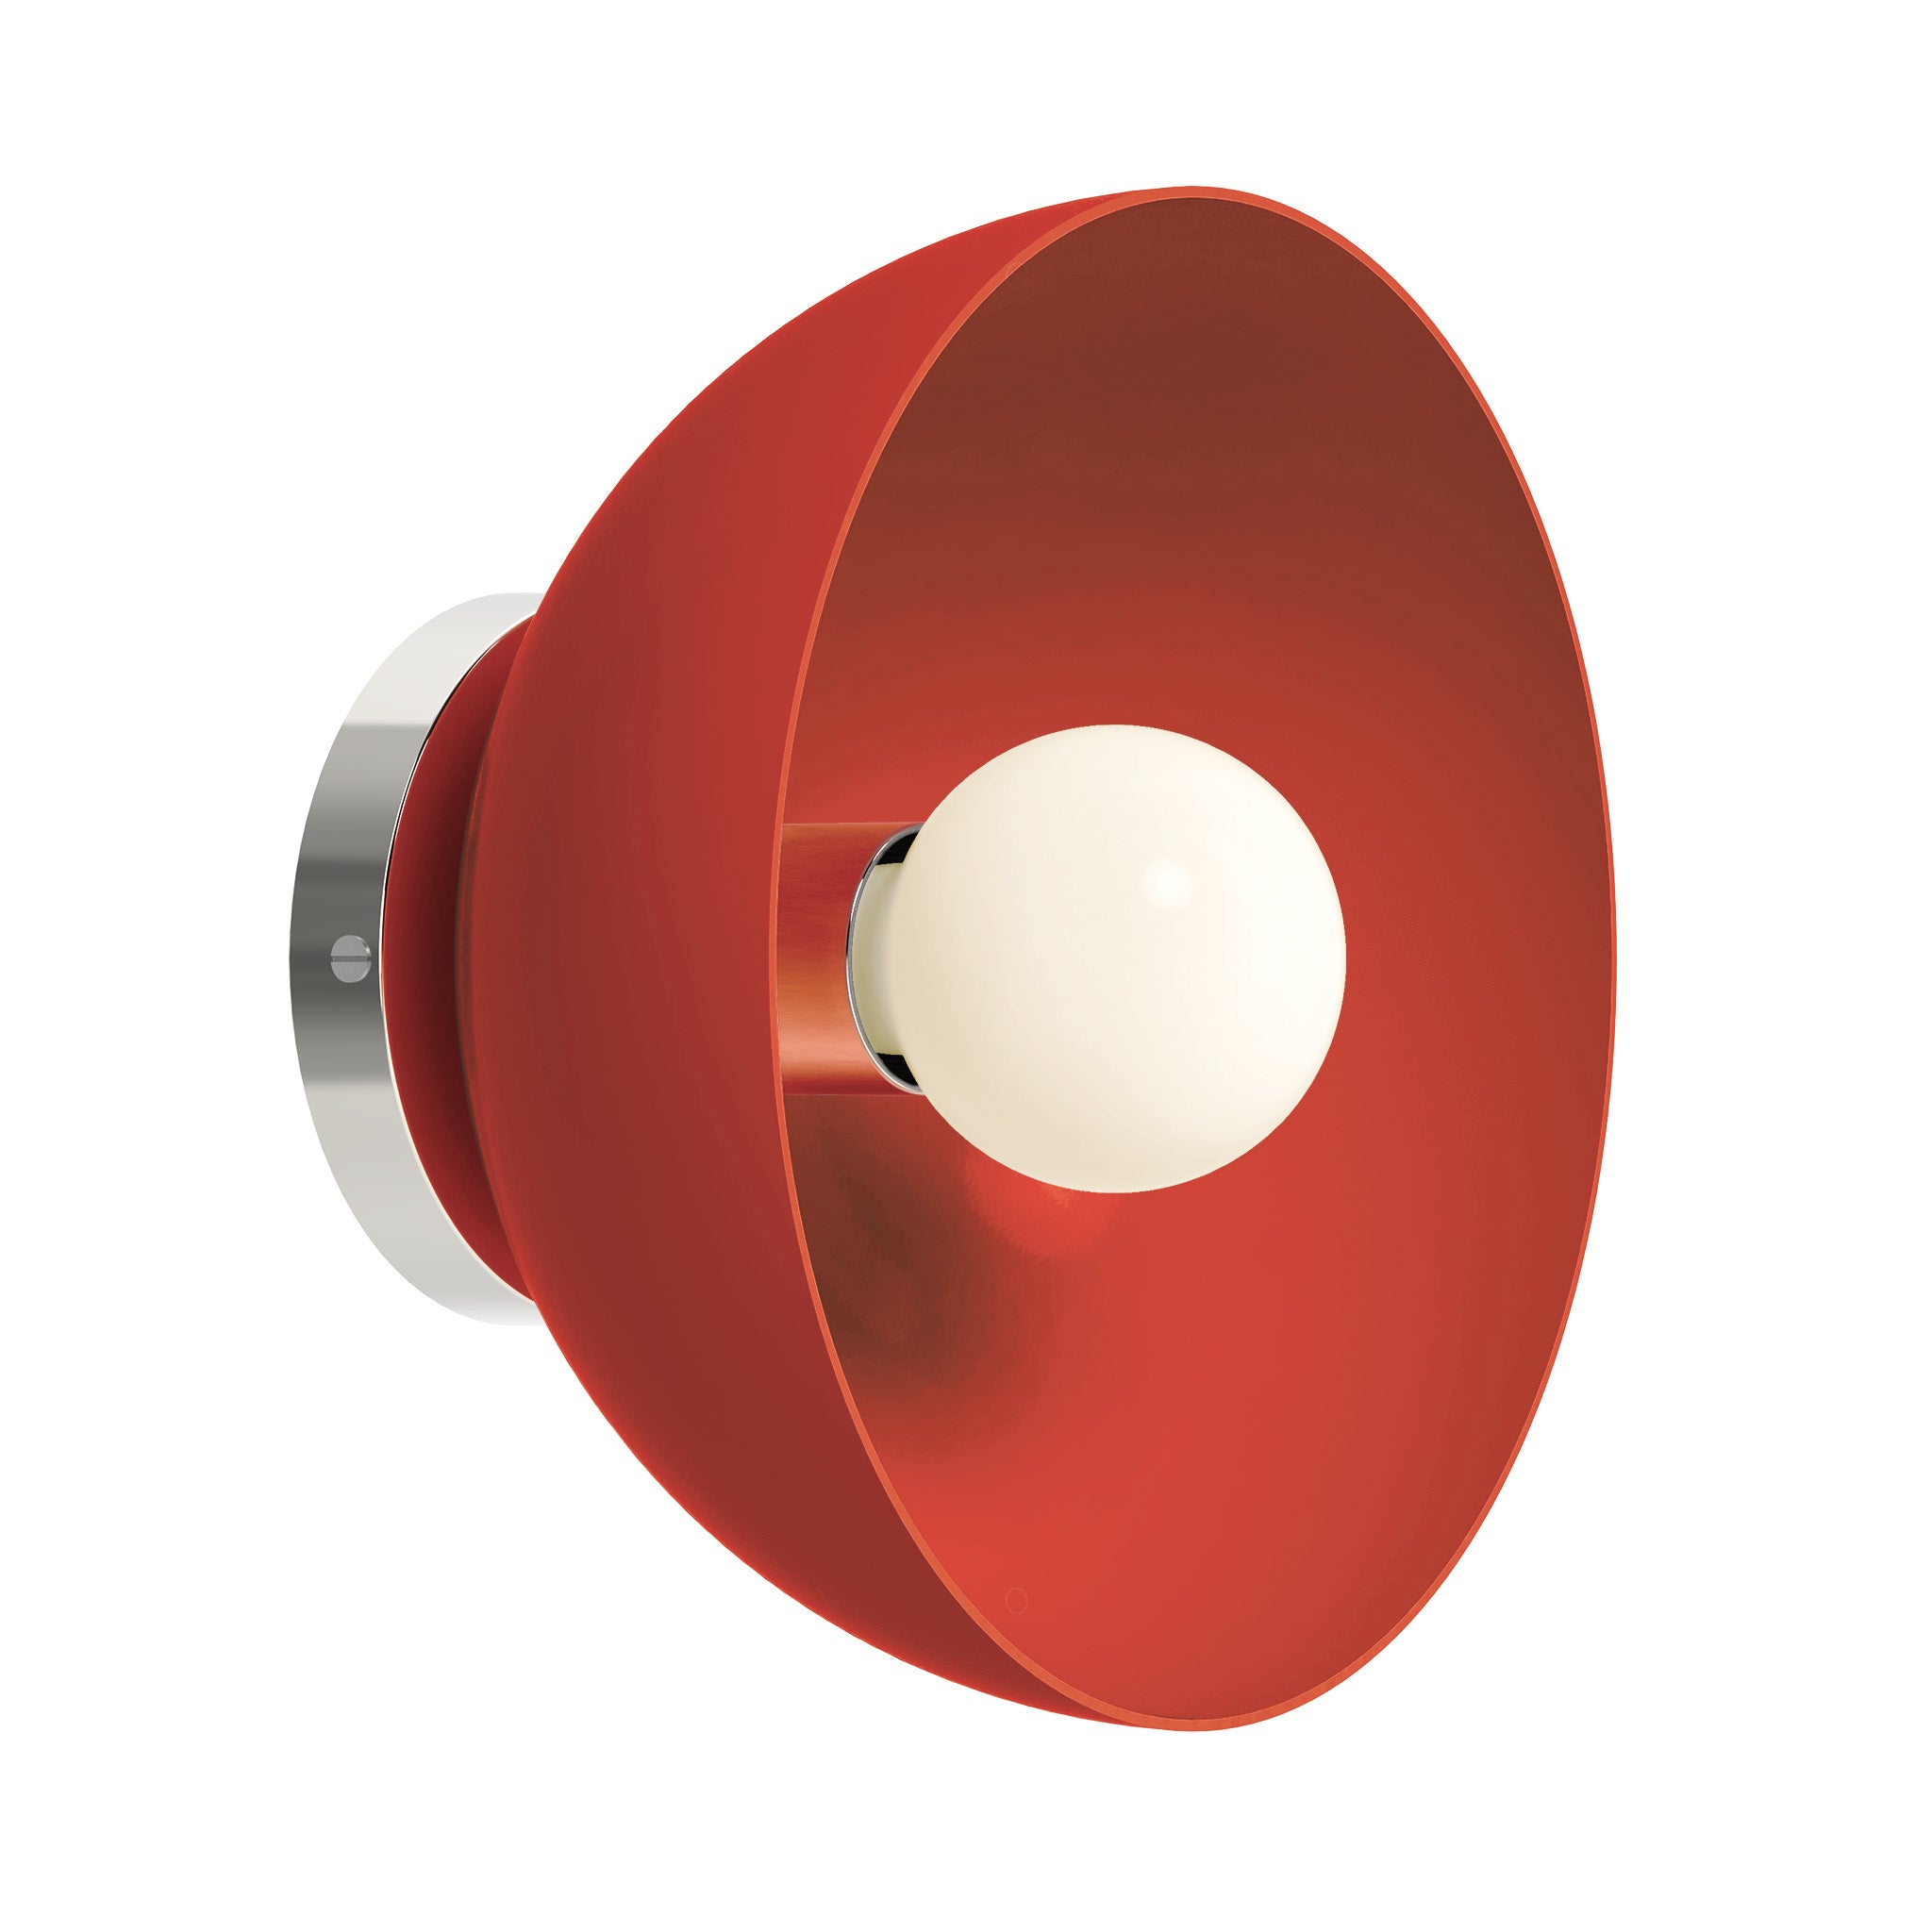 Nickel and riding hood red color hemi dome sconce 10" Dutton Brown lighting